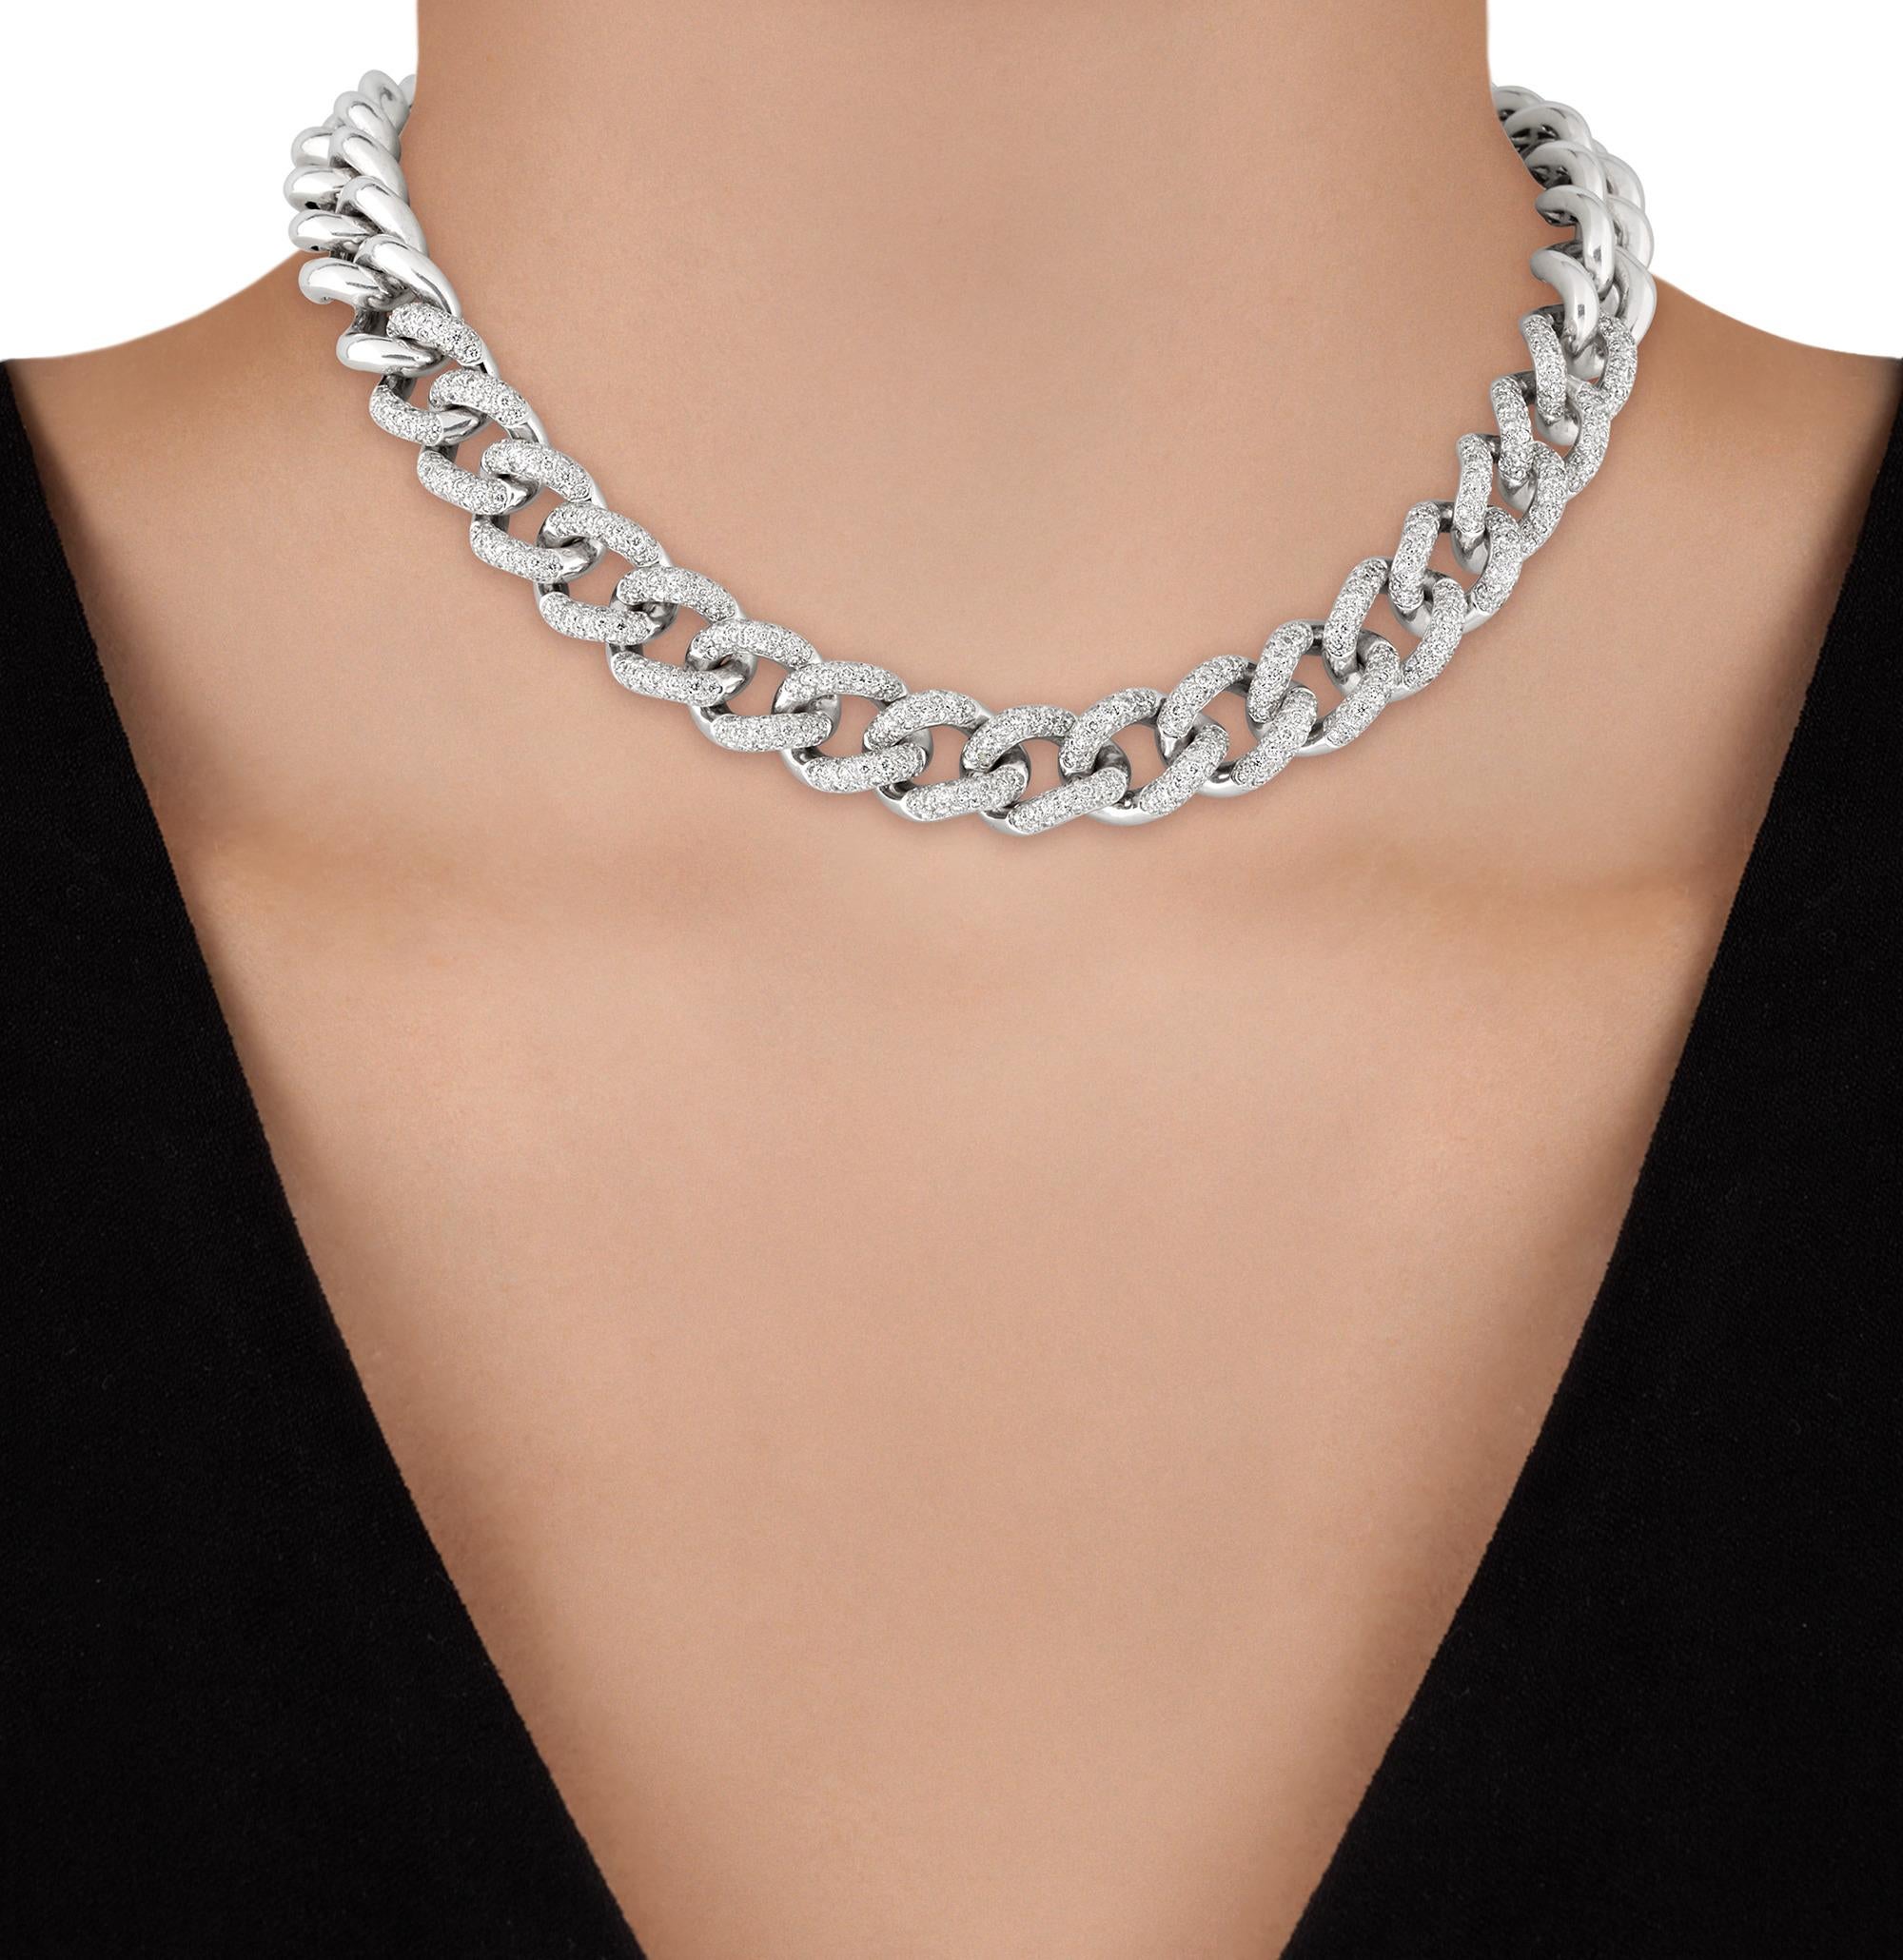 This dazzling necklace features 494 round brilliant cut diamonds of VS1-VS2 clarity and G-H color totaling approximately 3.95 carats. The substantial link chain is encrusted with hundreds of shimmering diamonds, each meticulously pavé set to exude a